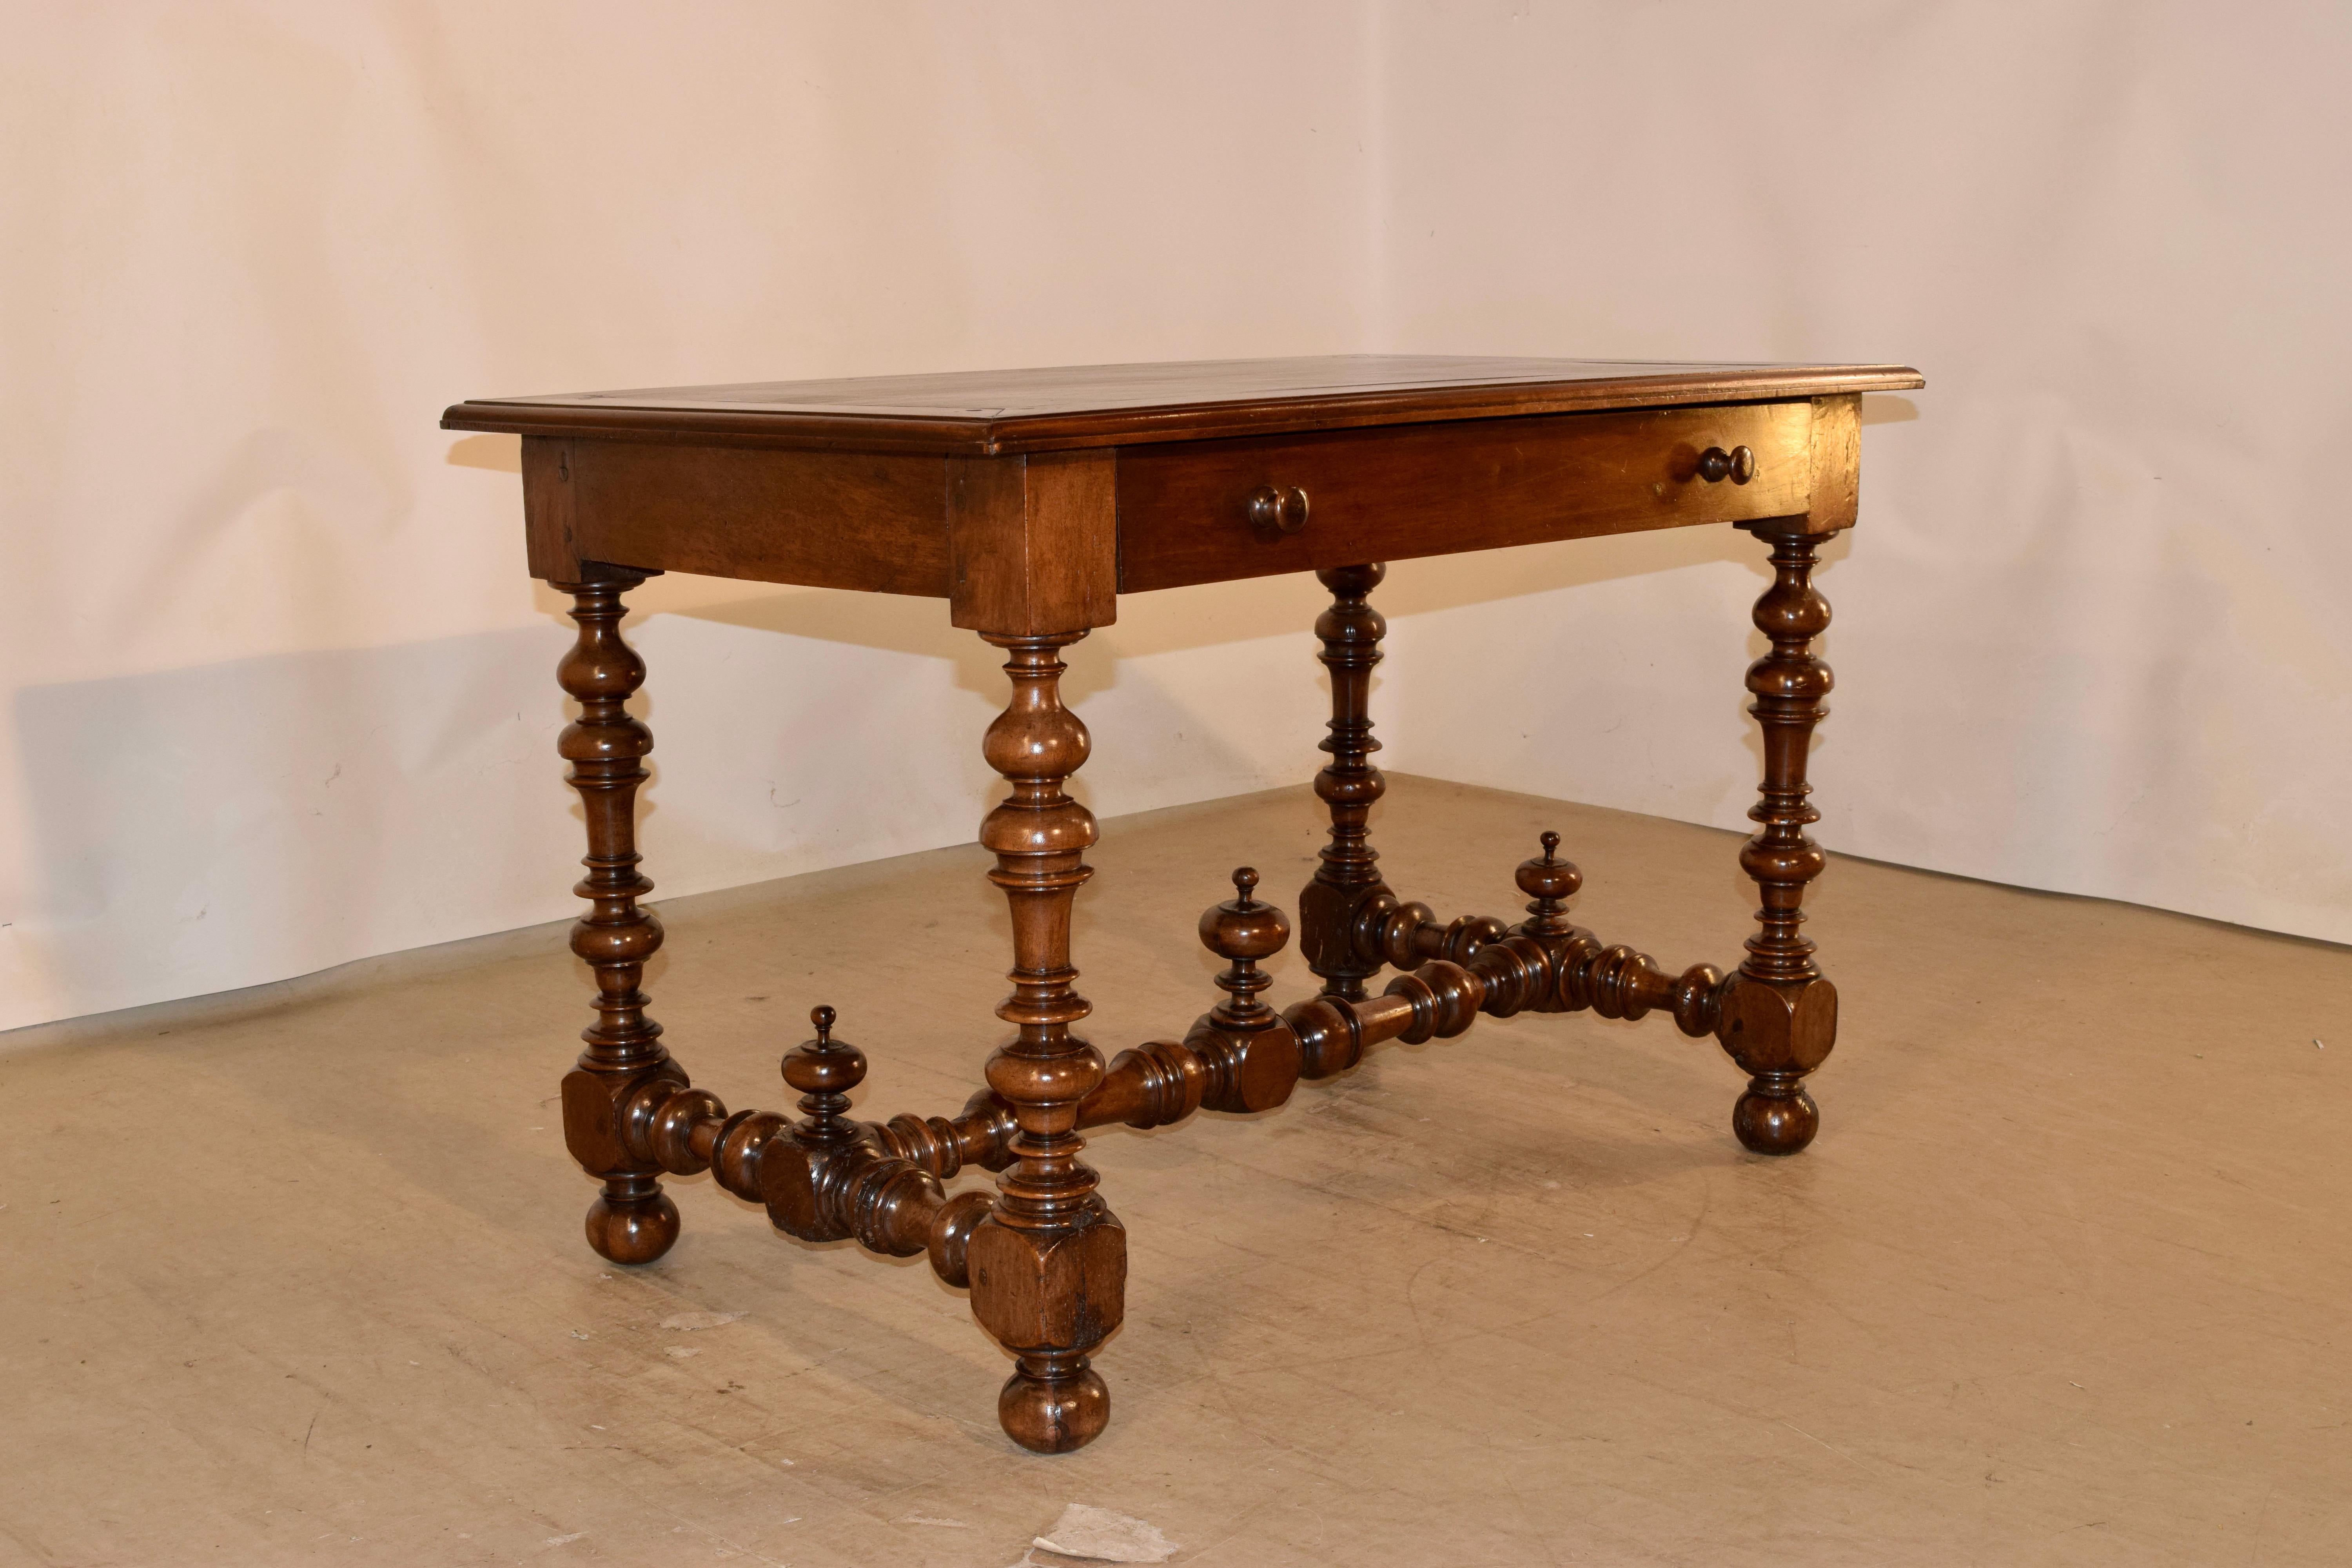 18th century walnut writing table with a banded and beveled edge around the top, following down to a simple apron containing a single drawer in the front and supported on hand turned legs joined by matching cross stretchers and finished with a